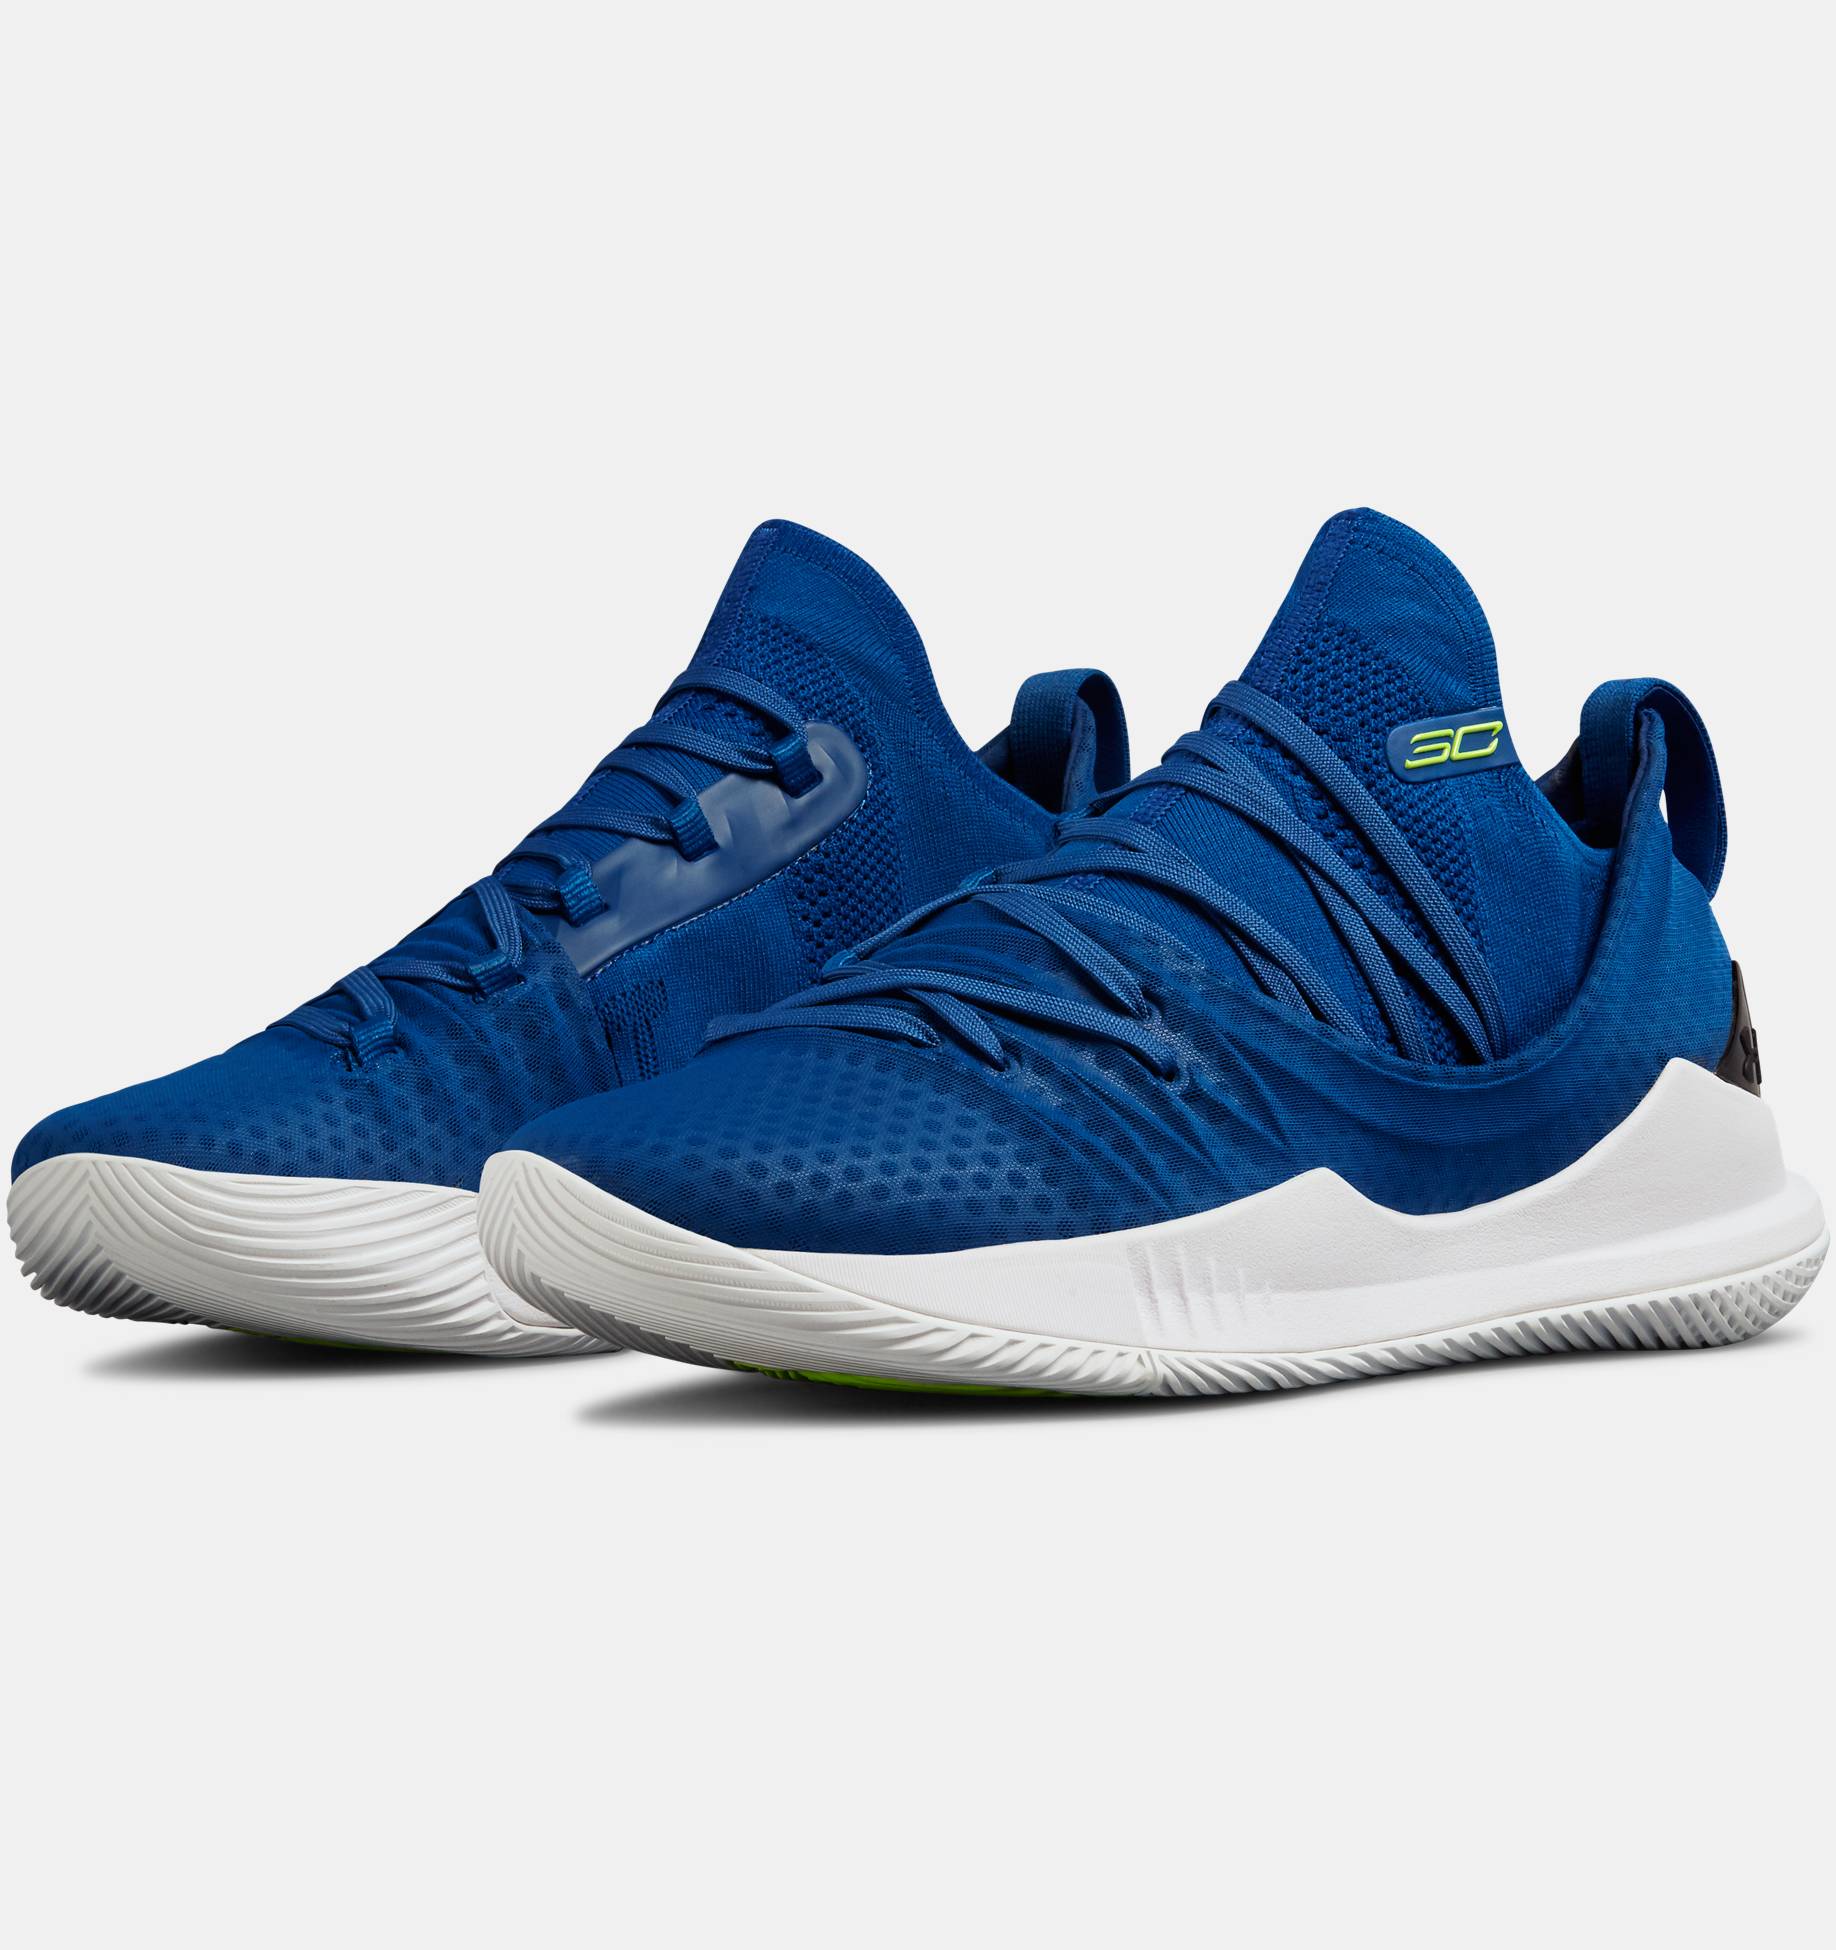 curry 5 moroccan blue stephen curry